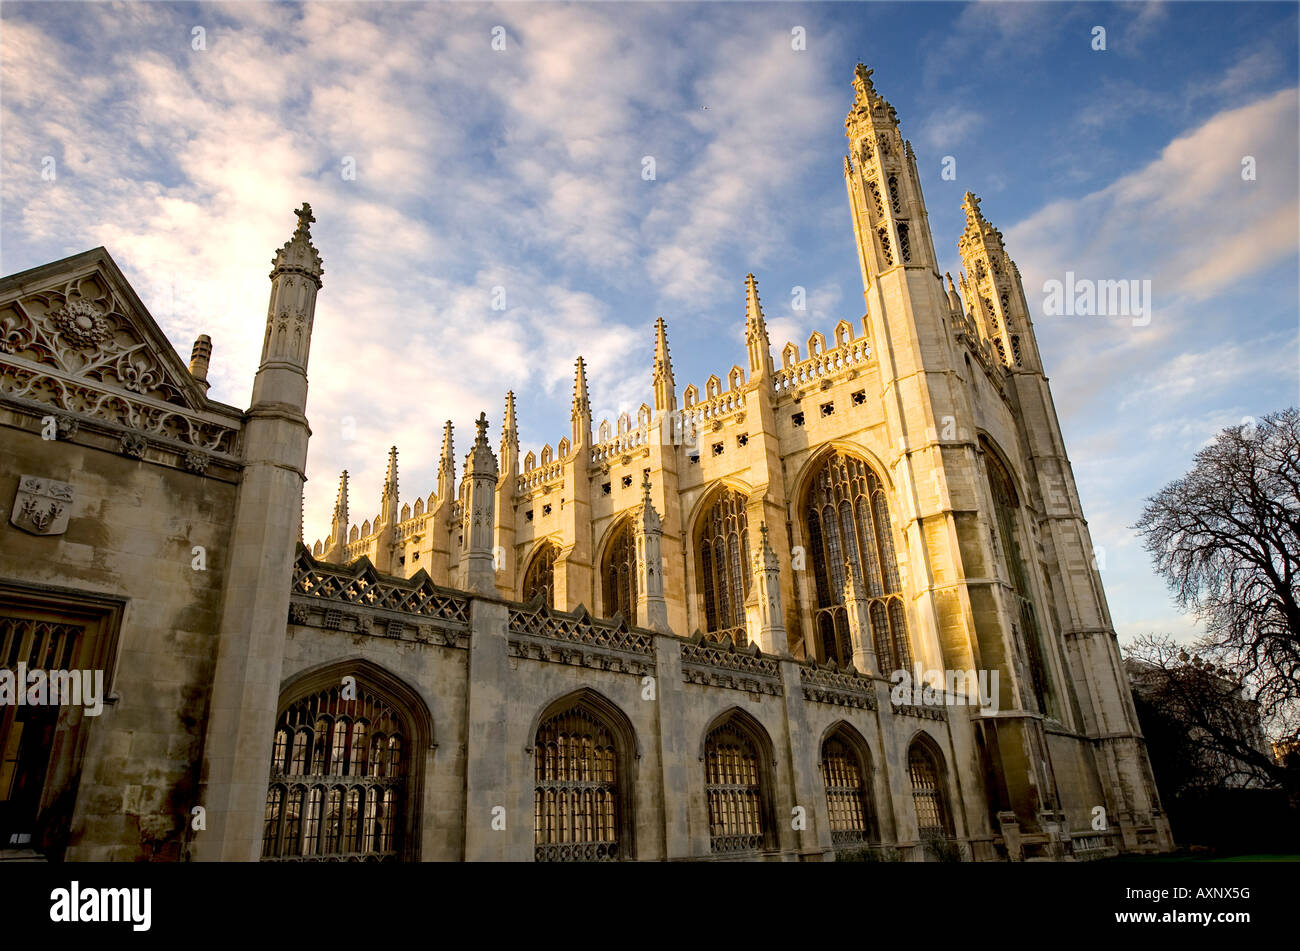 cambridge college architecture building university pillars door windows stone historic old listed buildings wall background text Stock Photo